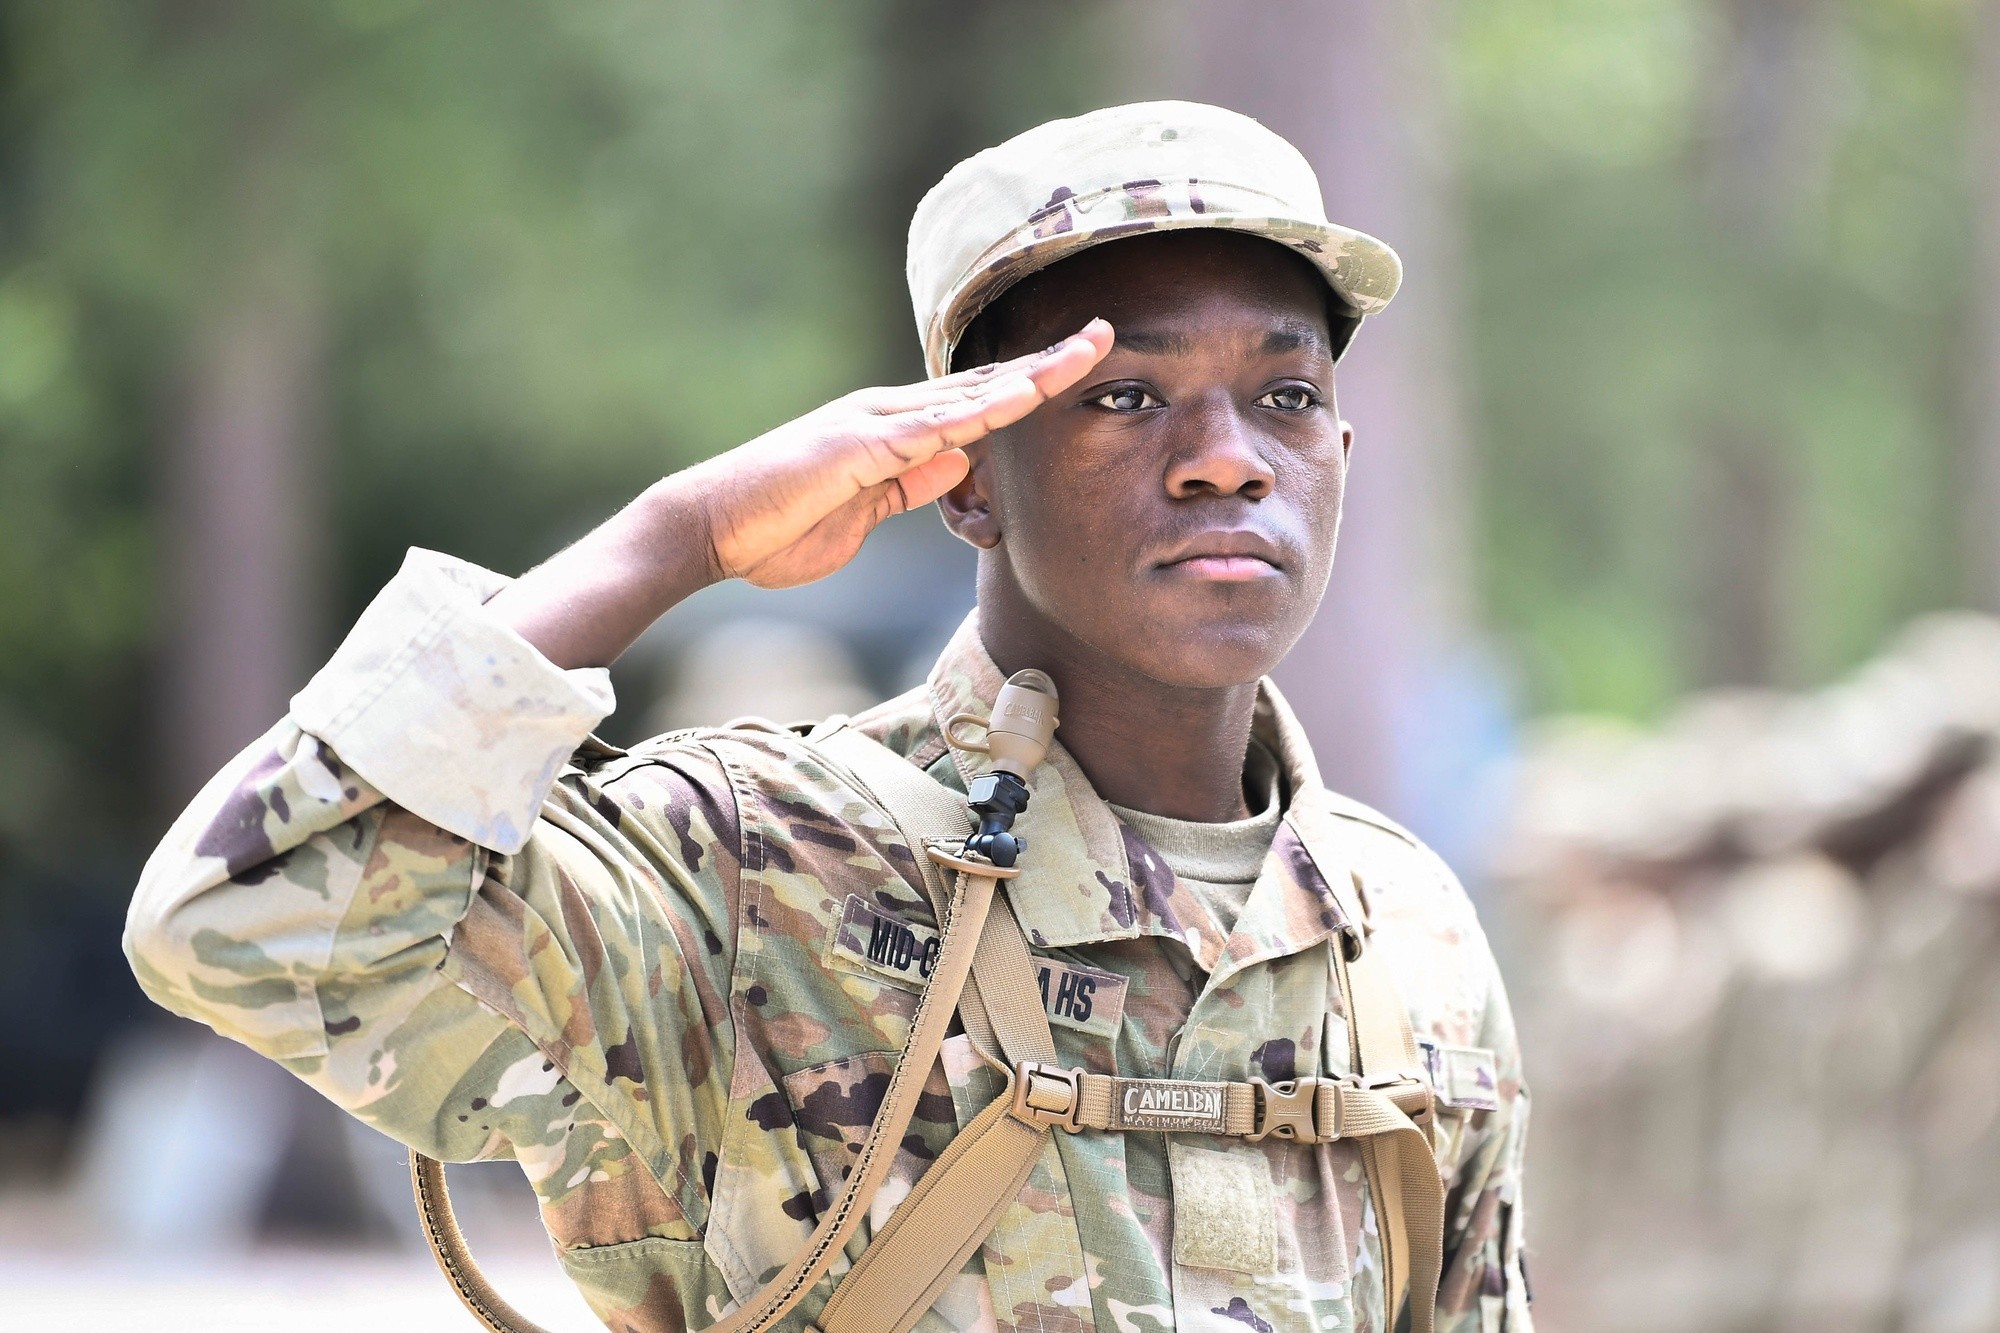 Not your average summer camp | Article | The United States Army